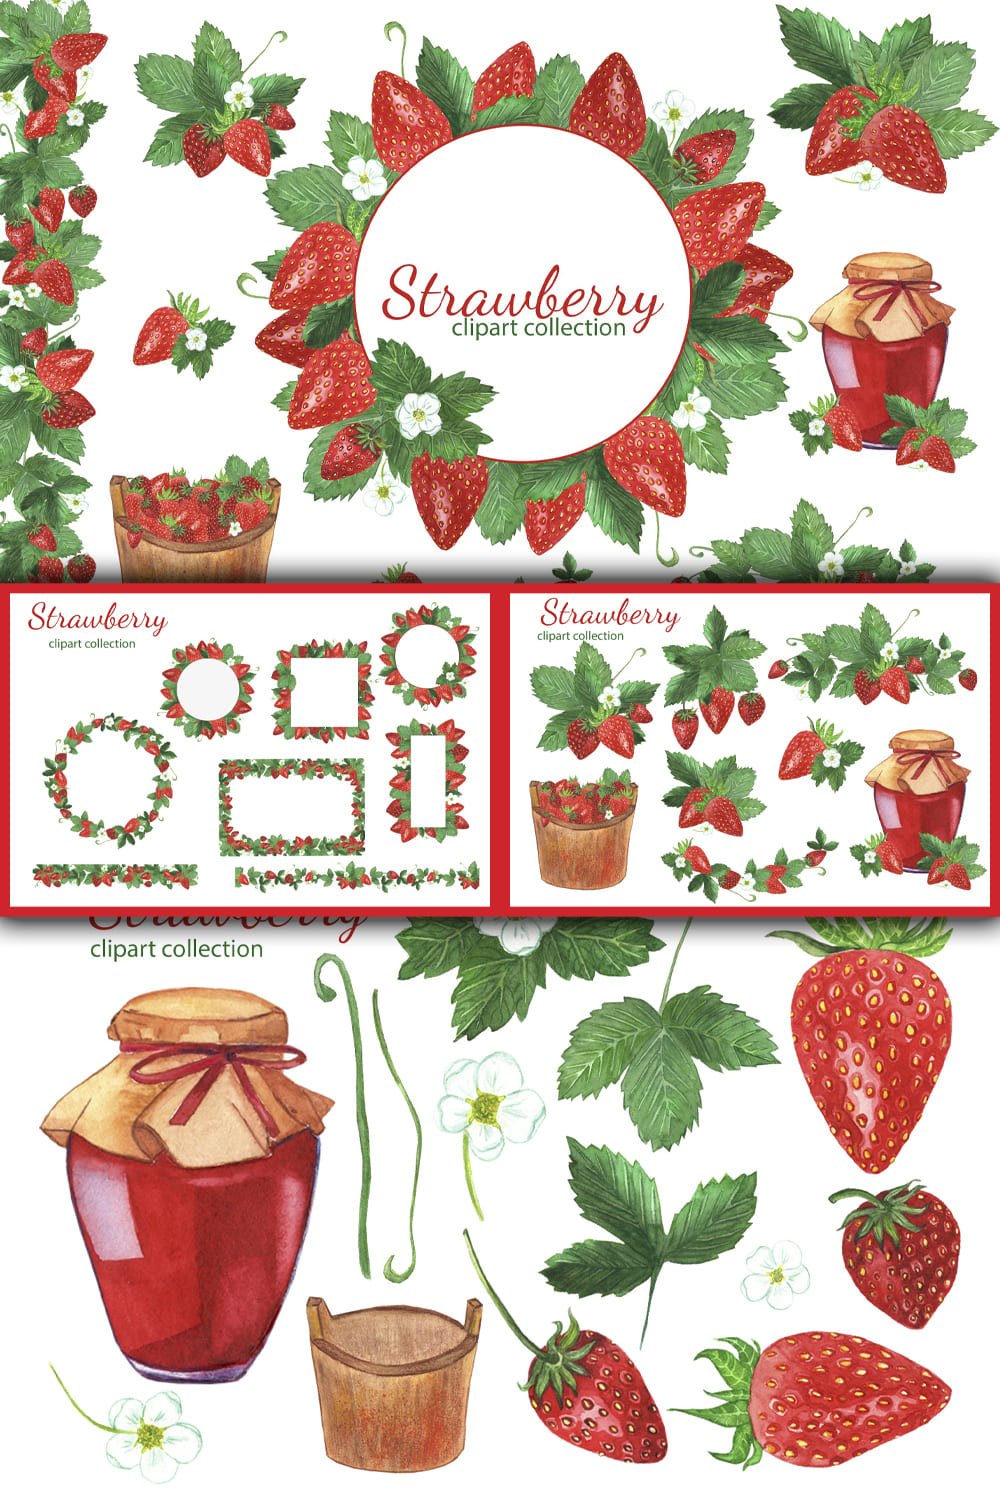 Watercolor strawberry clipart strawberries frames.